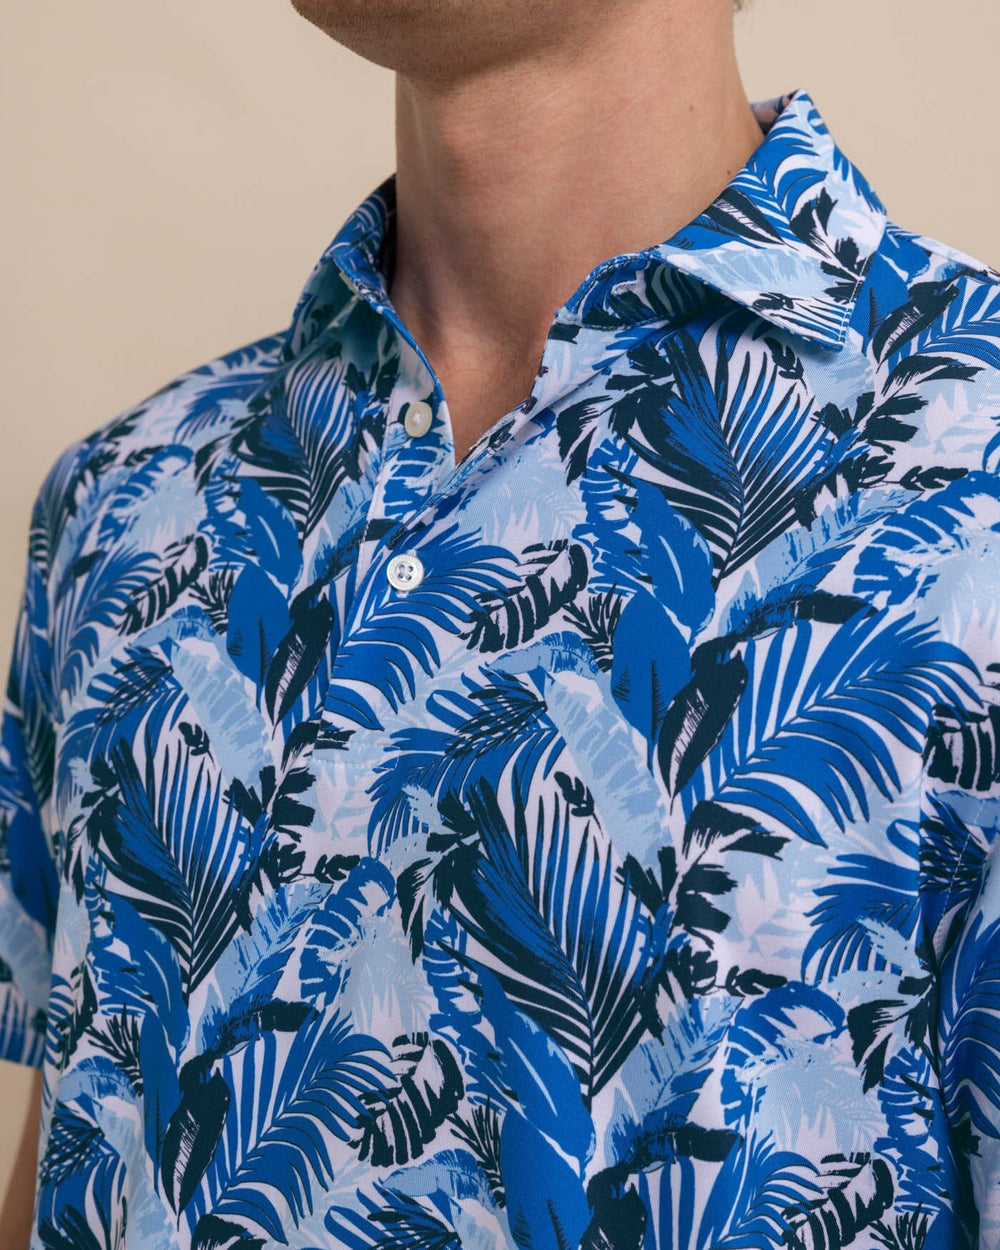 The detail view of the Southern Tide Driver Paradise Palms Polo Shirt by Southern Tide - Classic White